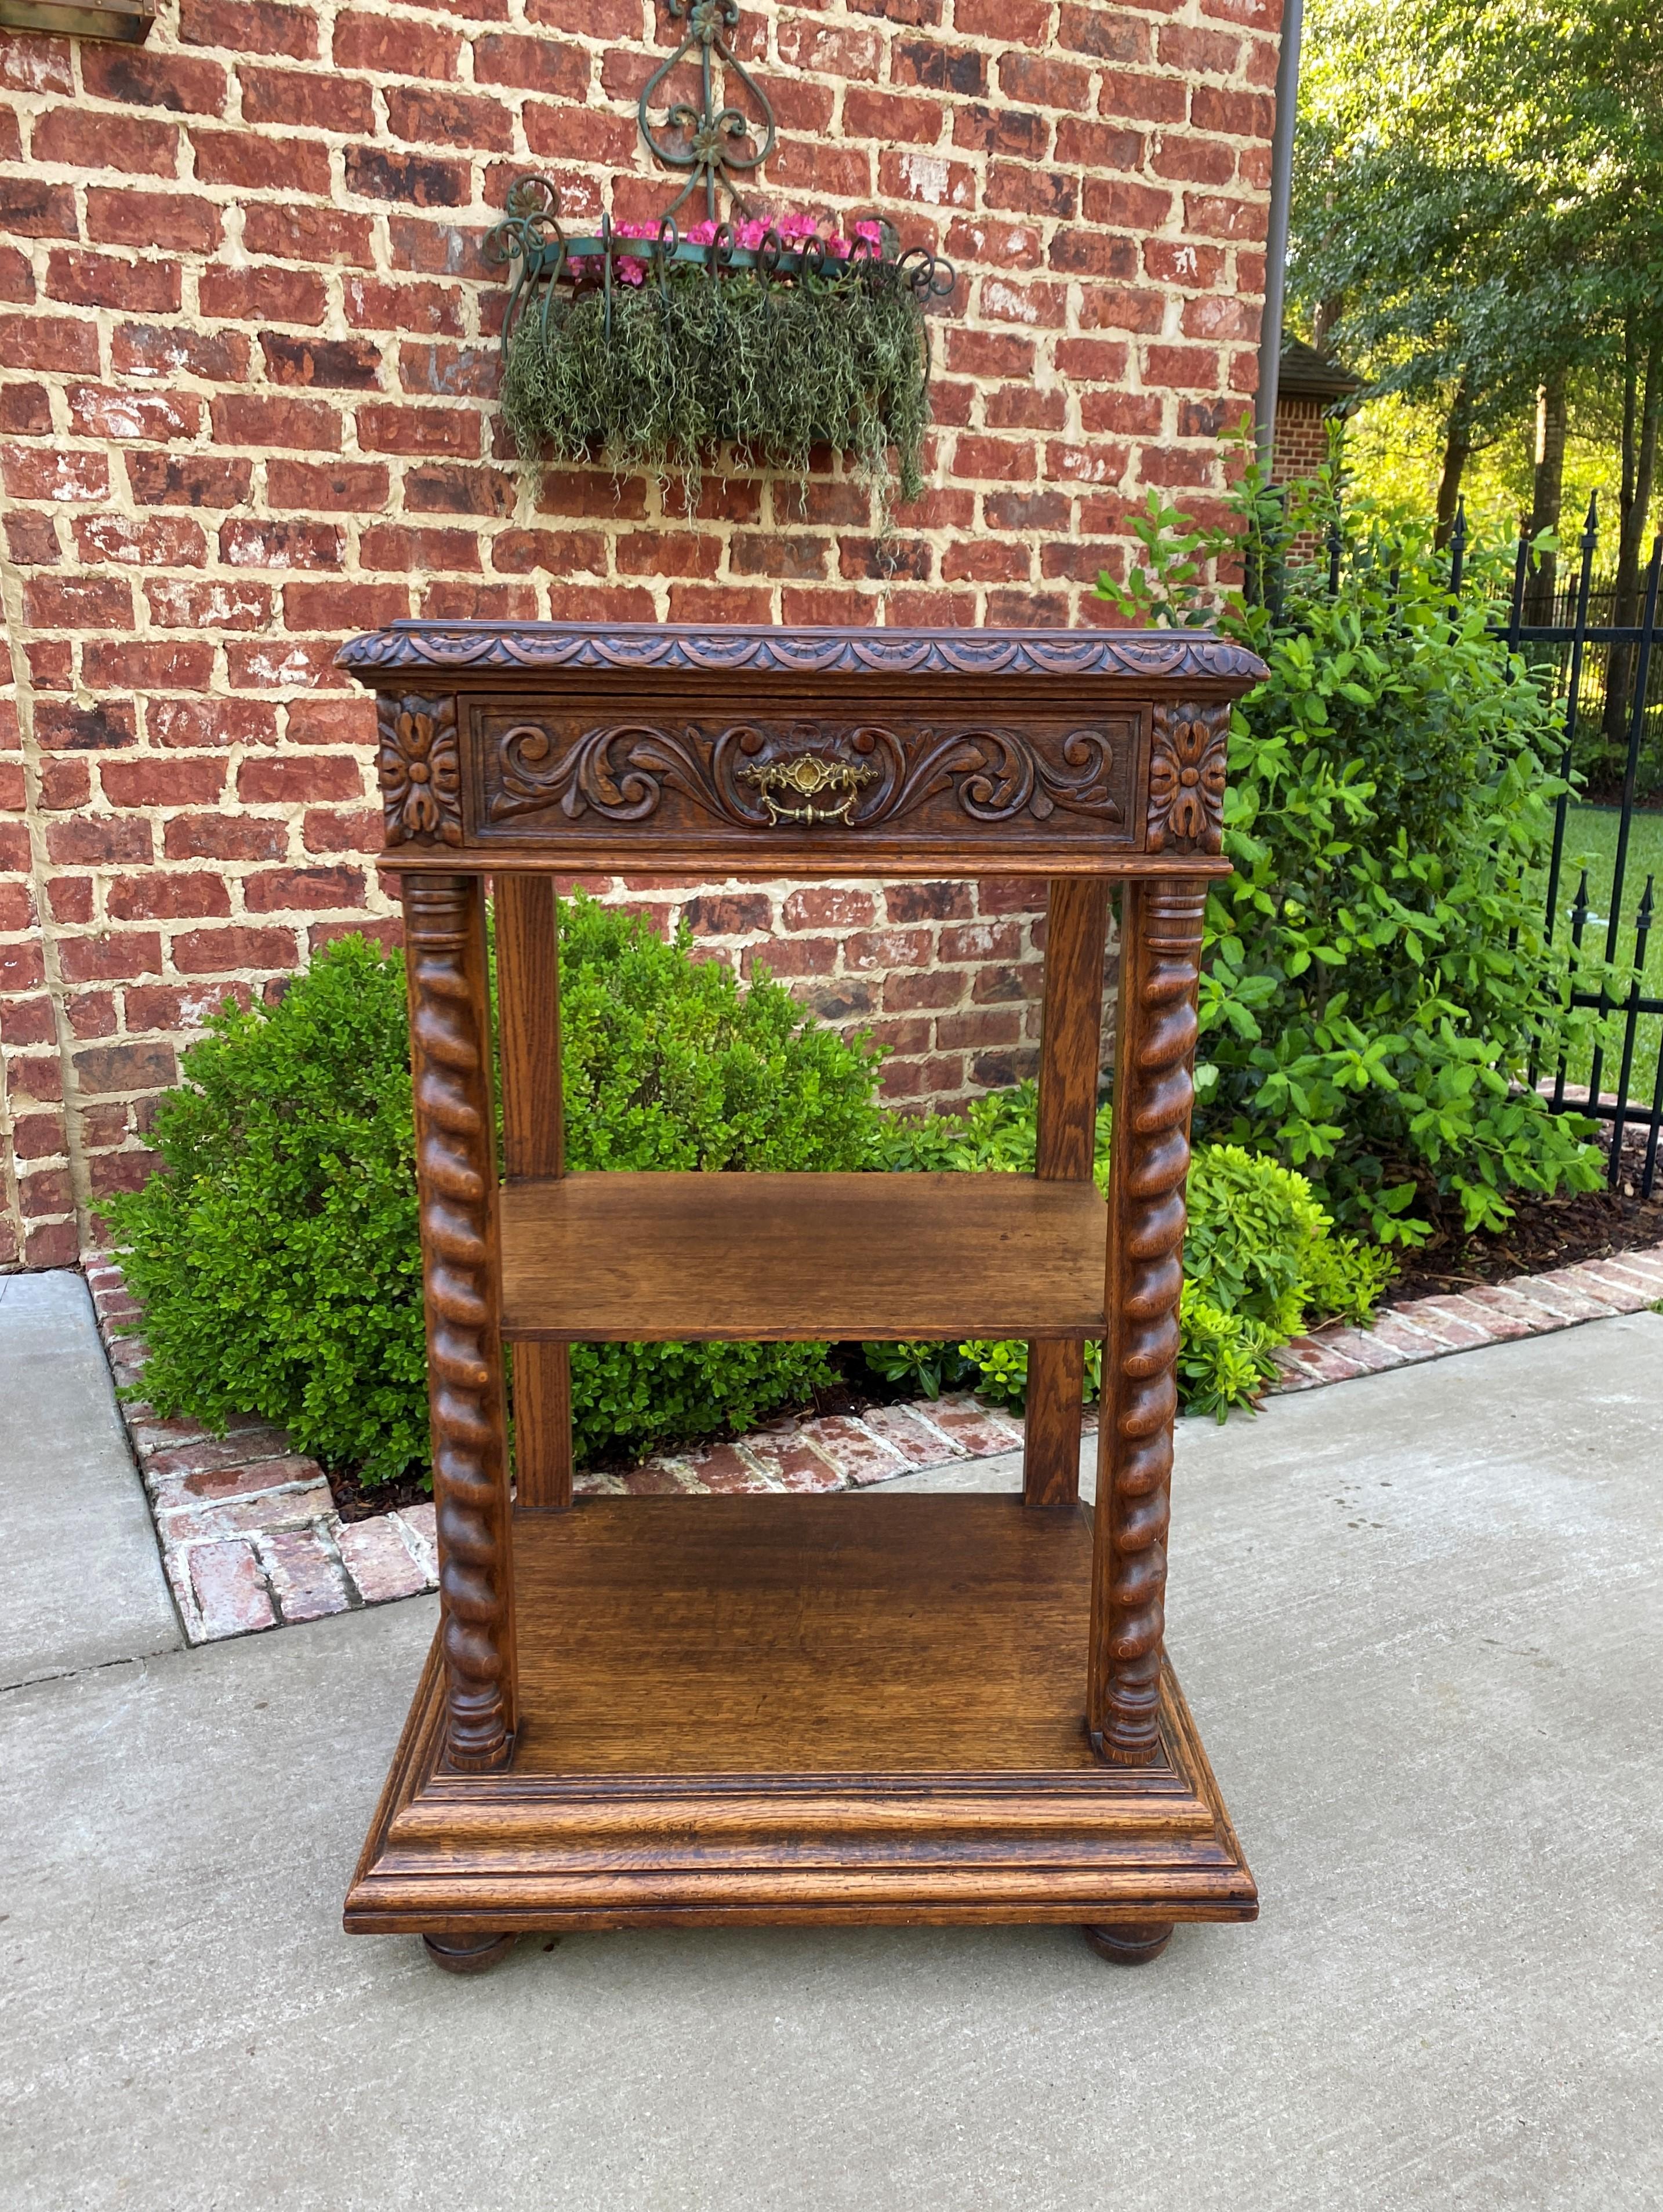 Late 19th Century Antique French Oak BARLEY TWIST 2-Tier Dessert Server, Side Cabinet, Display Table, or Pedestal ~~Renaissance Revival
~~TALL~~c. 1880s

Lunette carved edge top~~hand-cut dovetailed drawer, sturdy and stable 